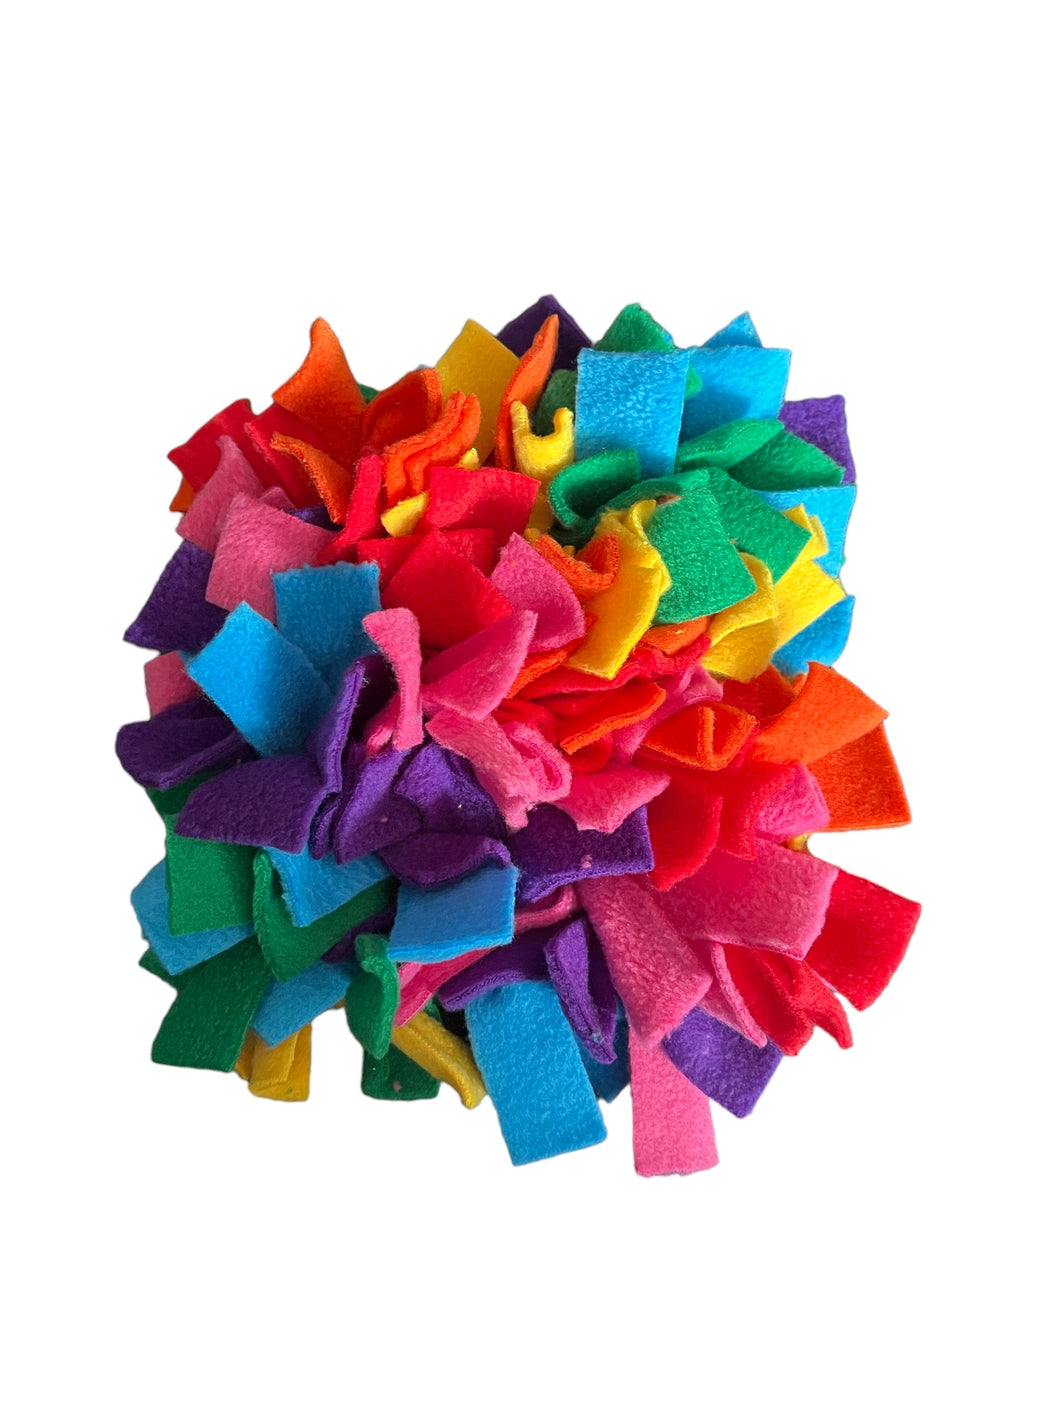 Snuffle mat sniff the rainbow enrichment dog toy